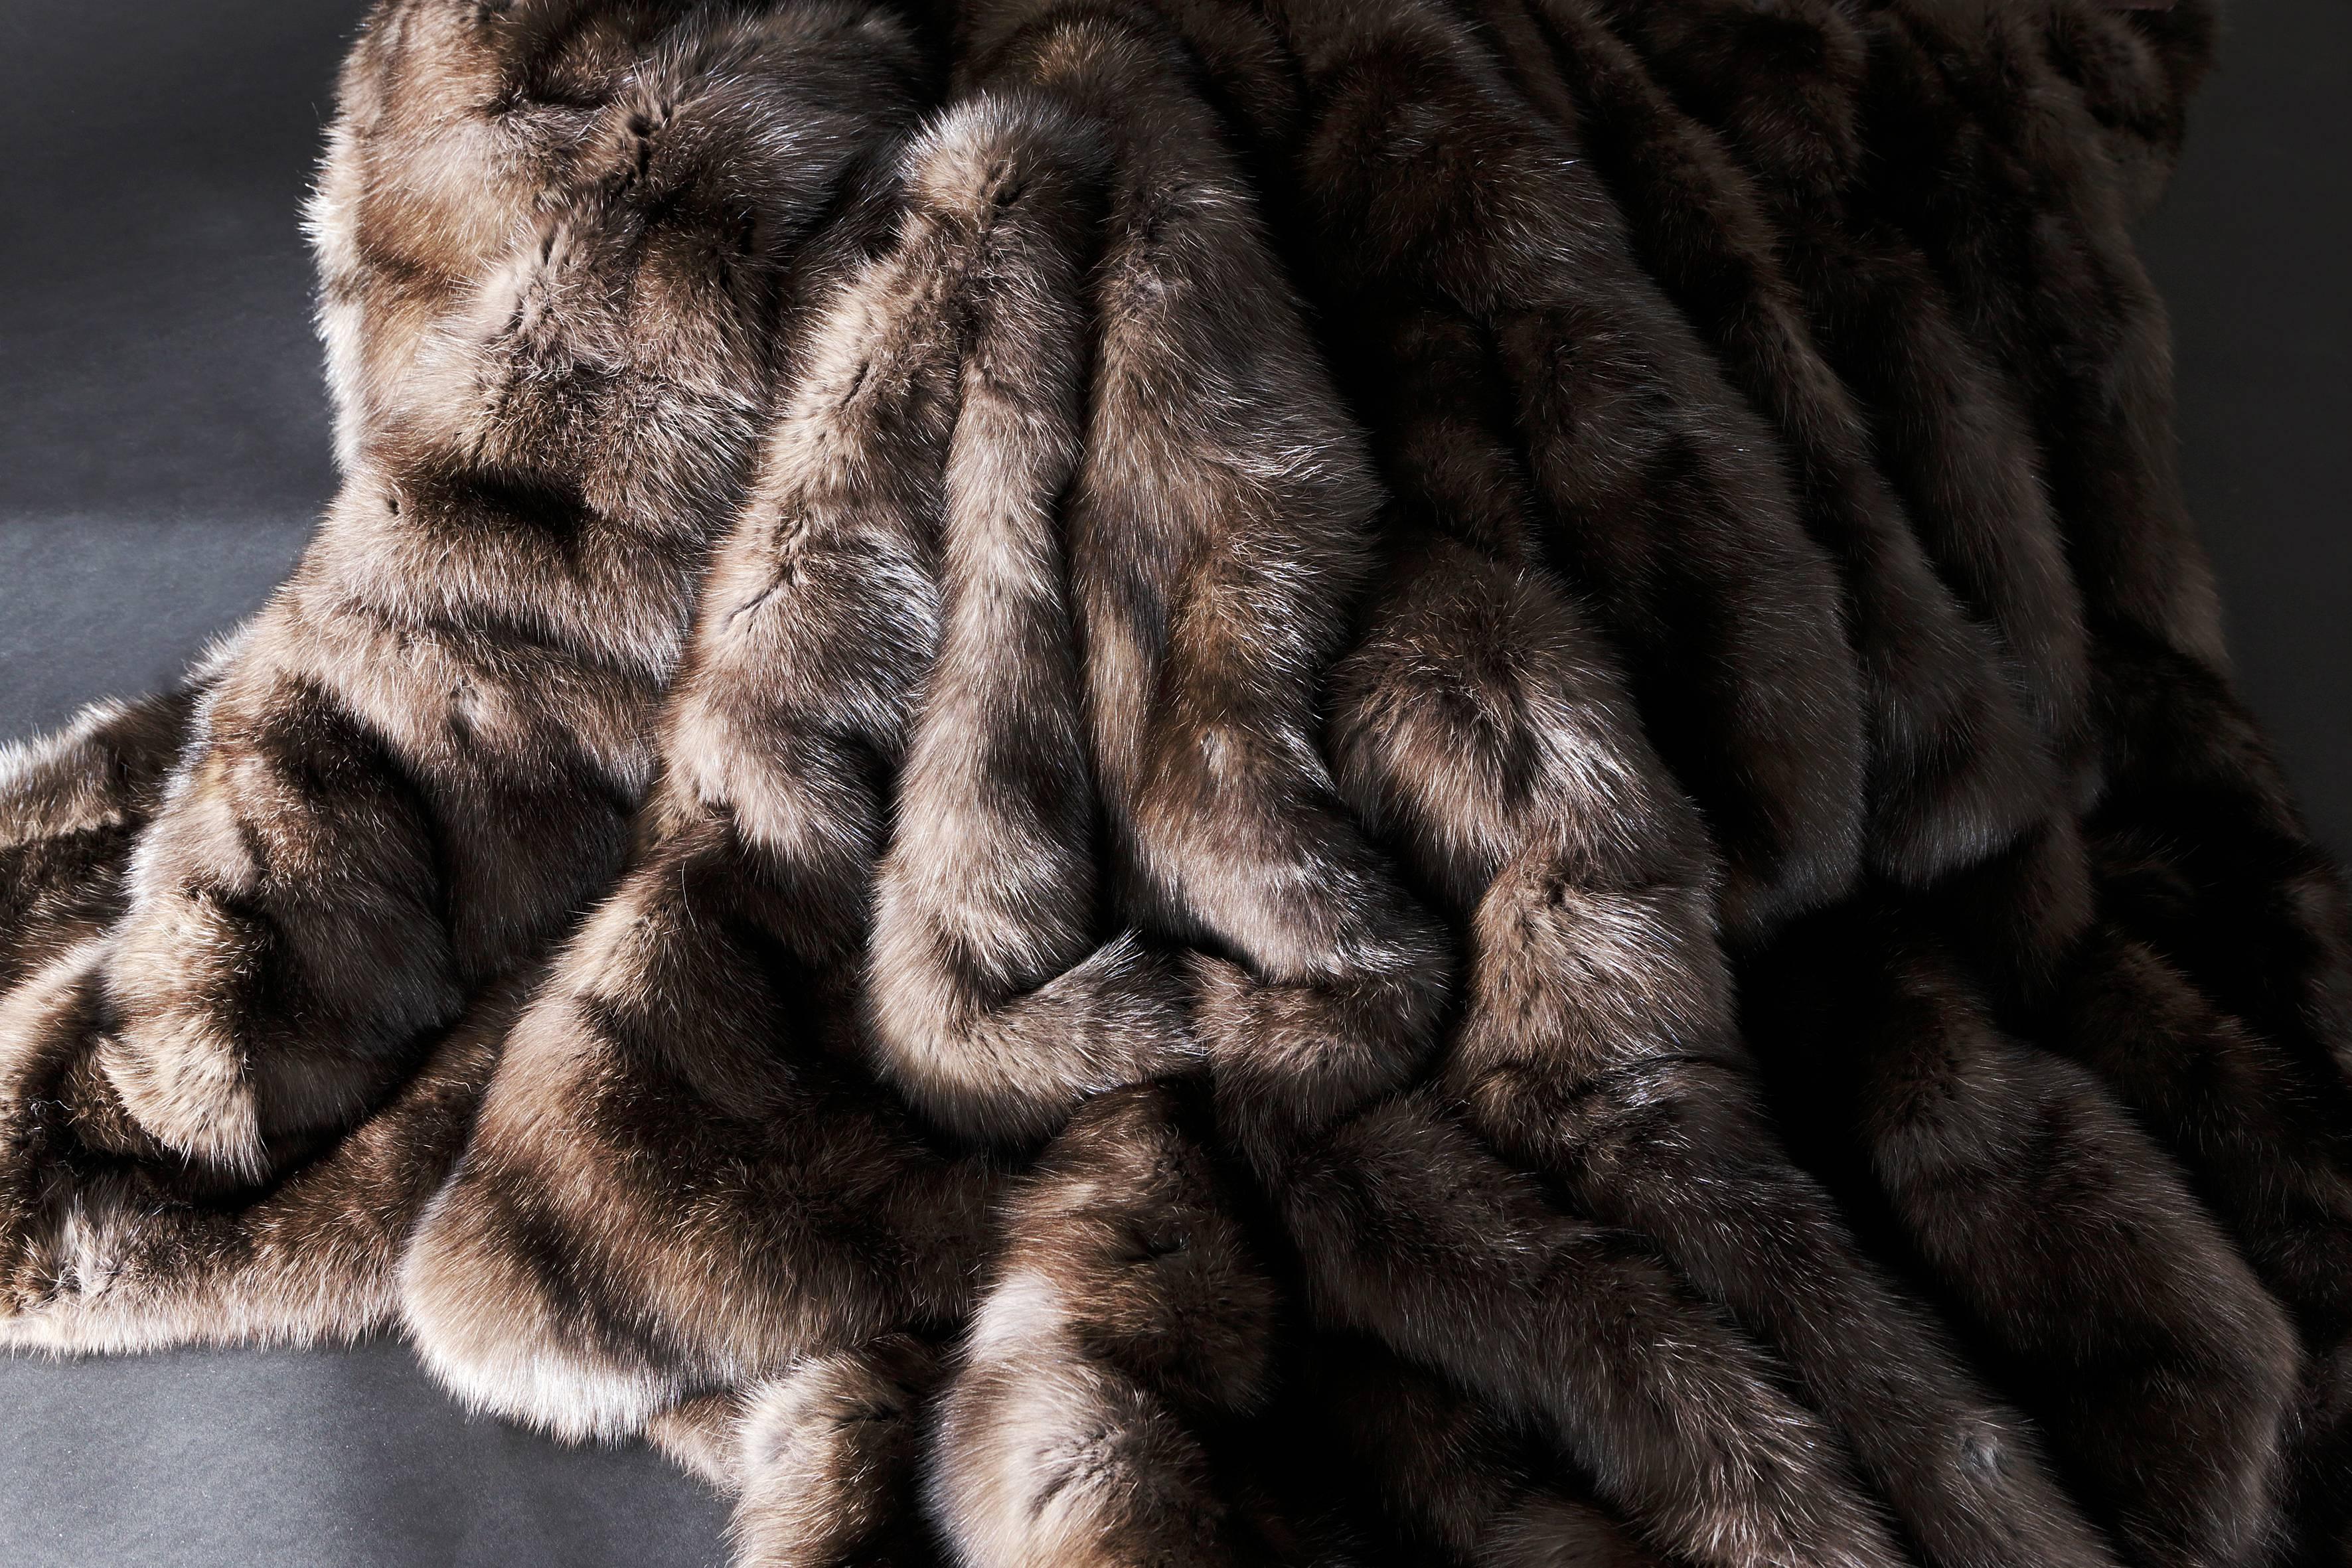 Luxurious Barguzin sable throw.
Hand-stitched in France.
Lined with beautiful Italian cashmere.
Delivered in gift box.